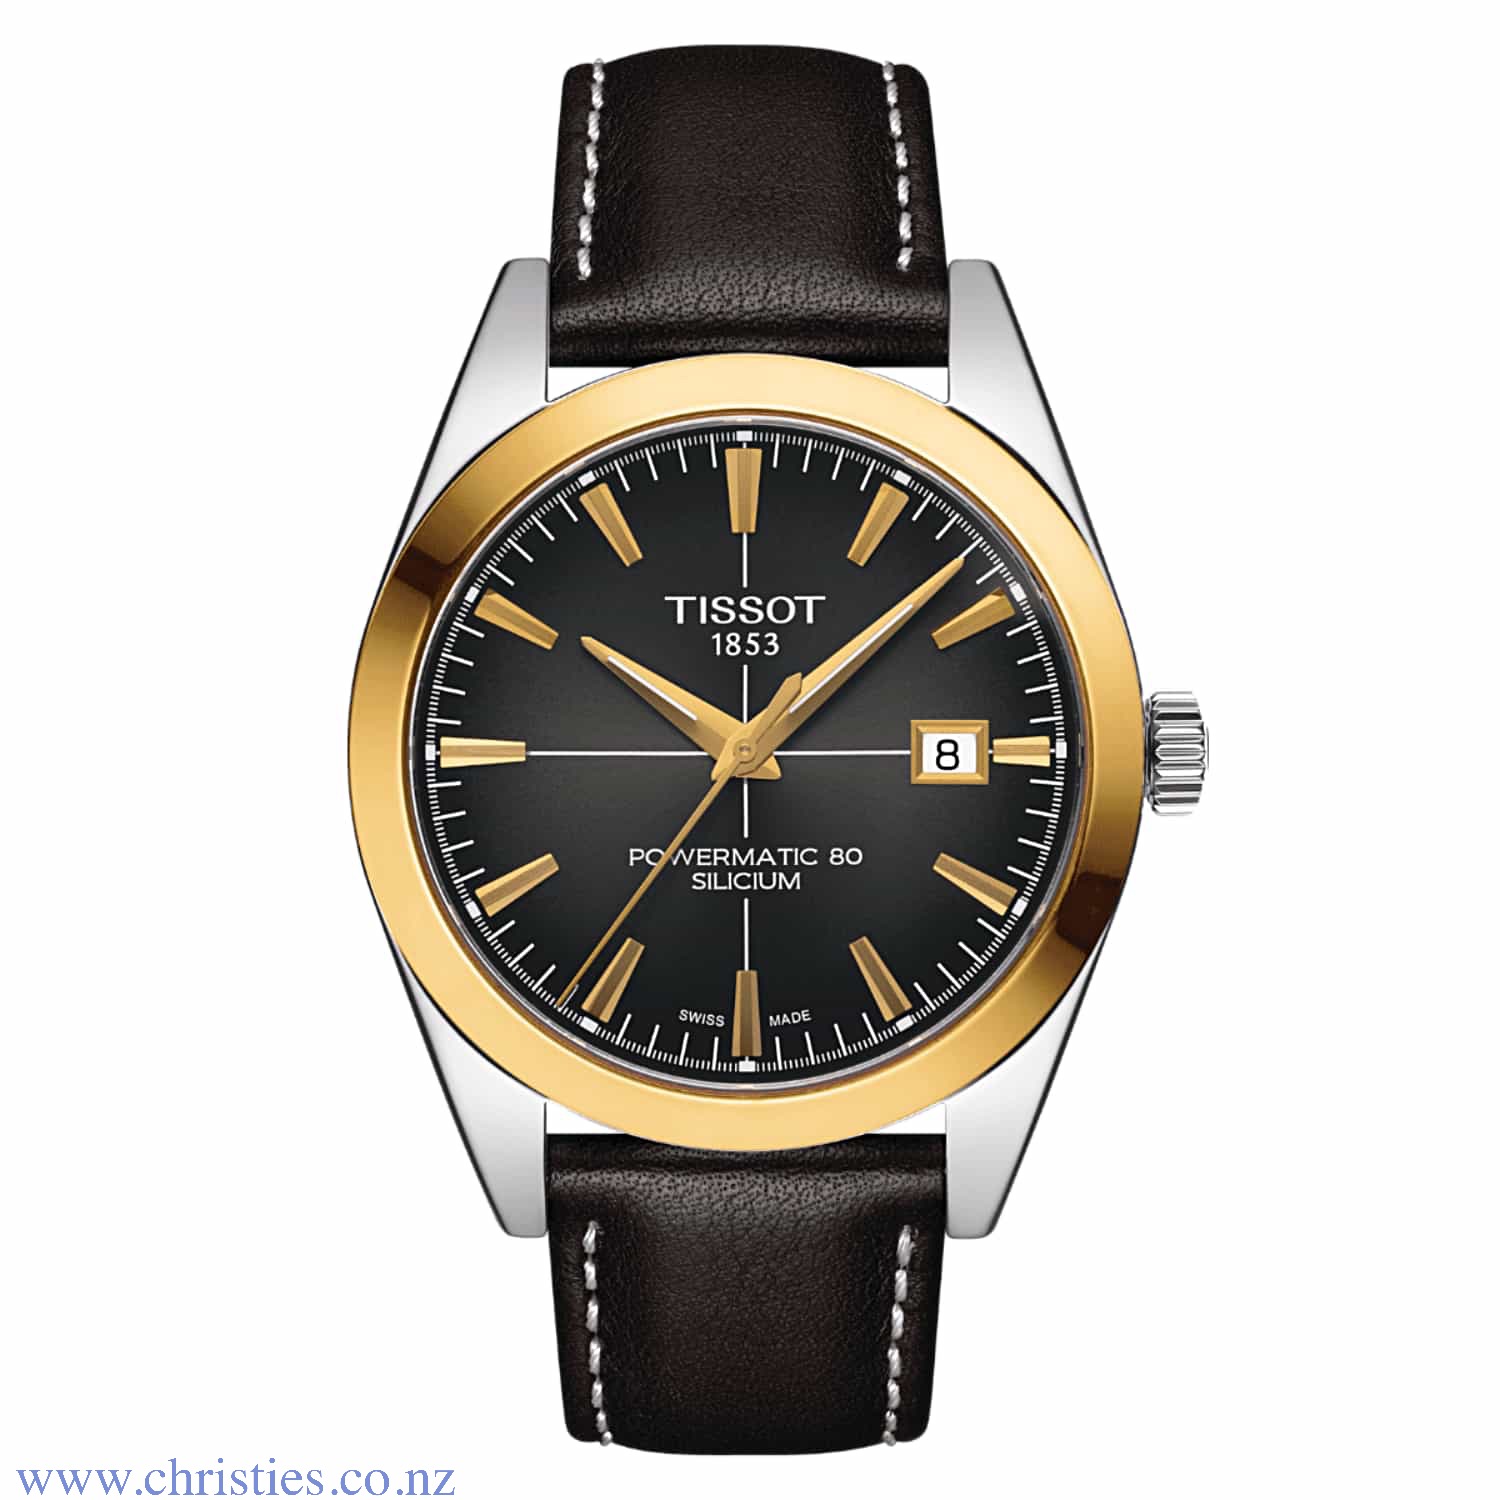 TISSOT T-Gold Gentleman Automatic T927.407.46.061.01. TISSOT T-Gold Gentleman Automatic T927.407.46.061.01 Humm ‘Big things’ Up to $10,000 and up to 24 months to pay interest free, fortnightly, depending on what you buy. Get approved online or in-store fo